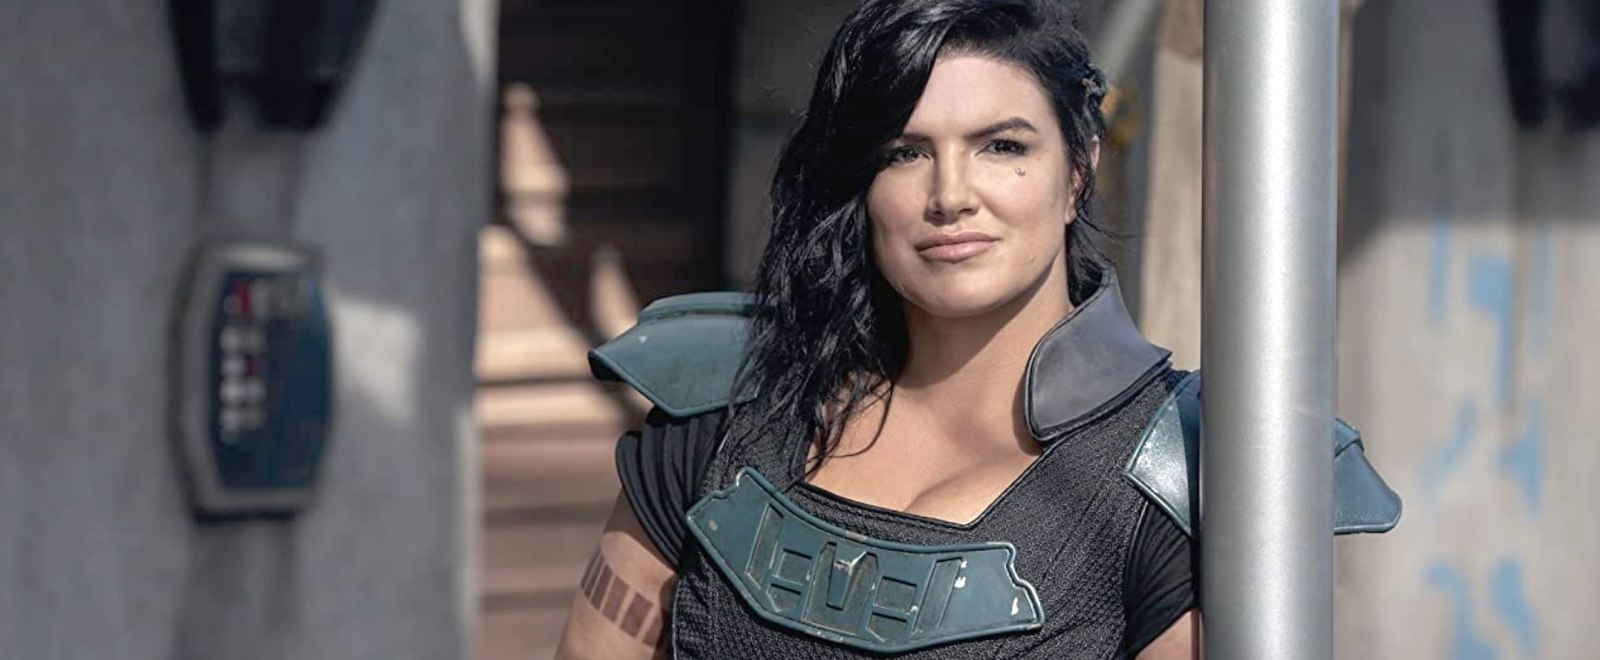 ‘The Mandalorian’ Star Gina Carano Is In Hot Water (Again) For Some Bad Social Media Posts (Again)